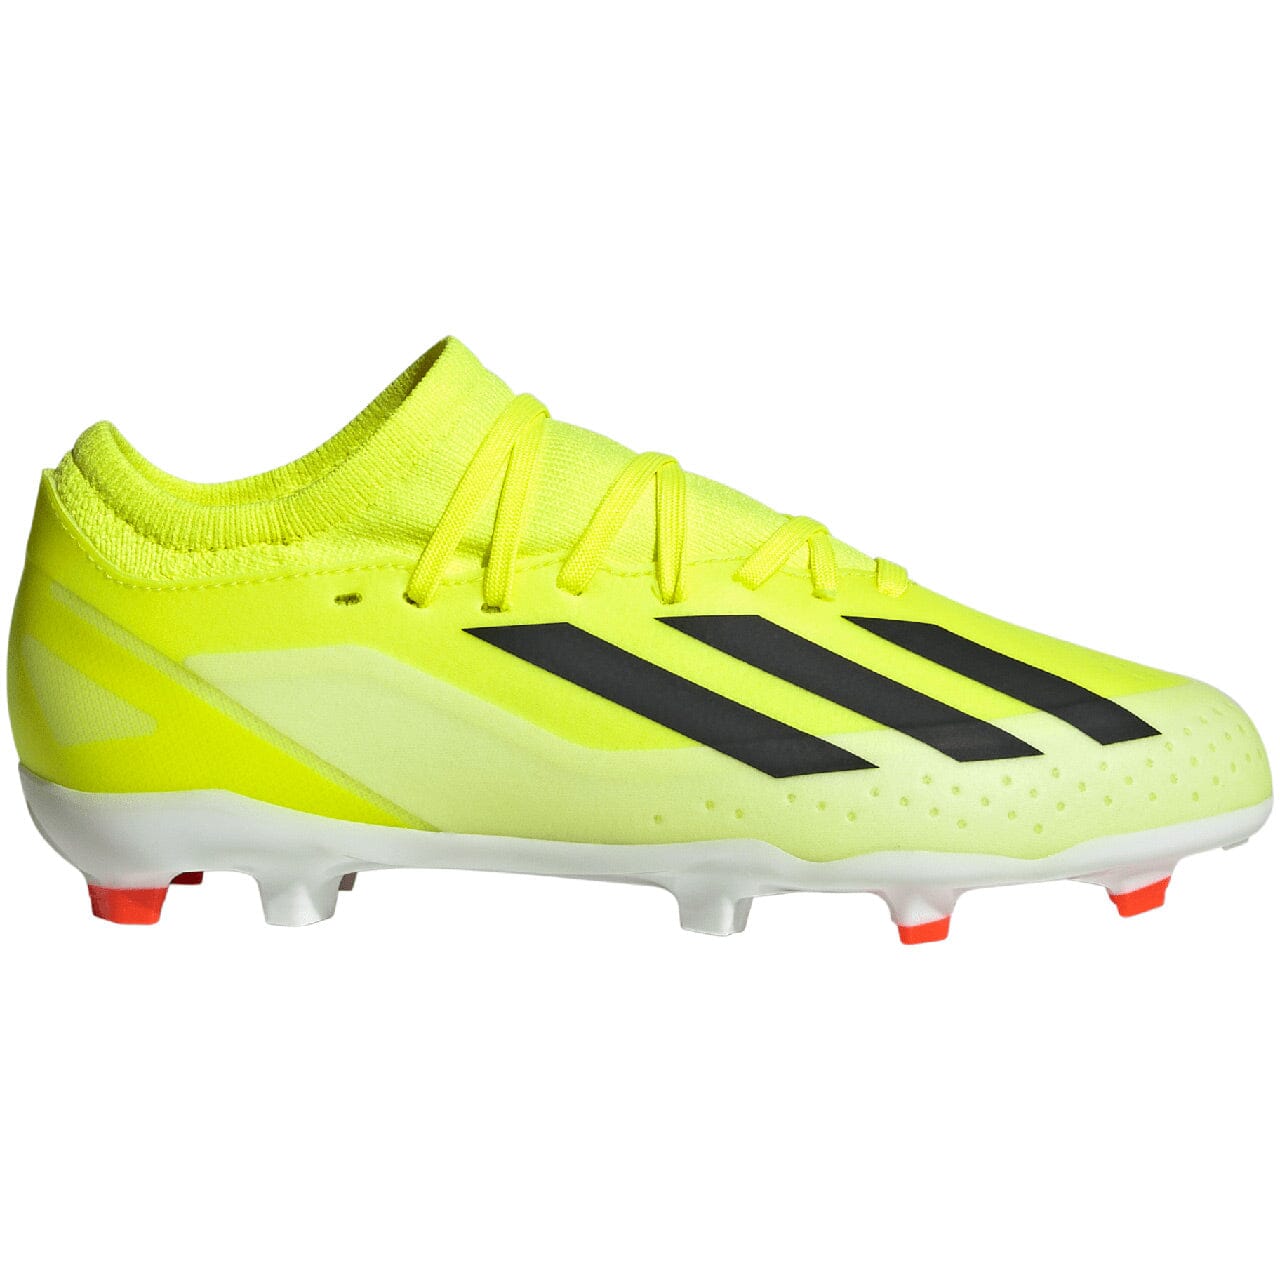 adidas Youth X Crazyfast League Firm Ground Soccer Cleats | IF0691 Adidas 1 TEAM SOLAR YELLOW 2/CORE BLACK/FTWR WHITE 